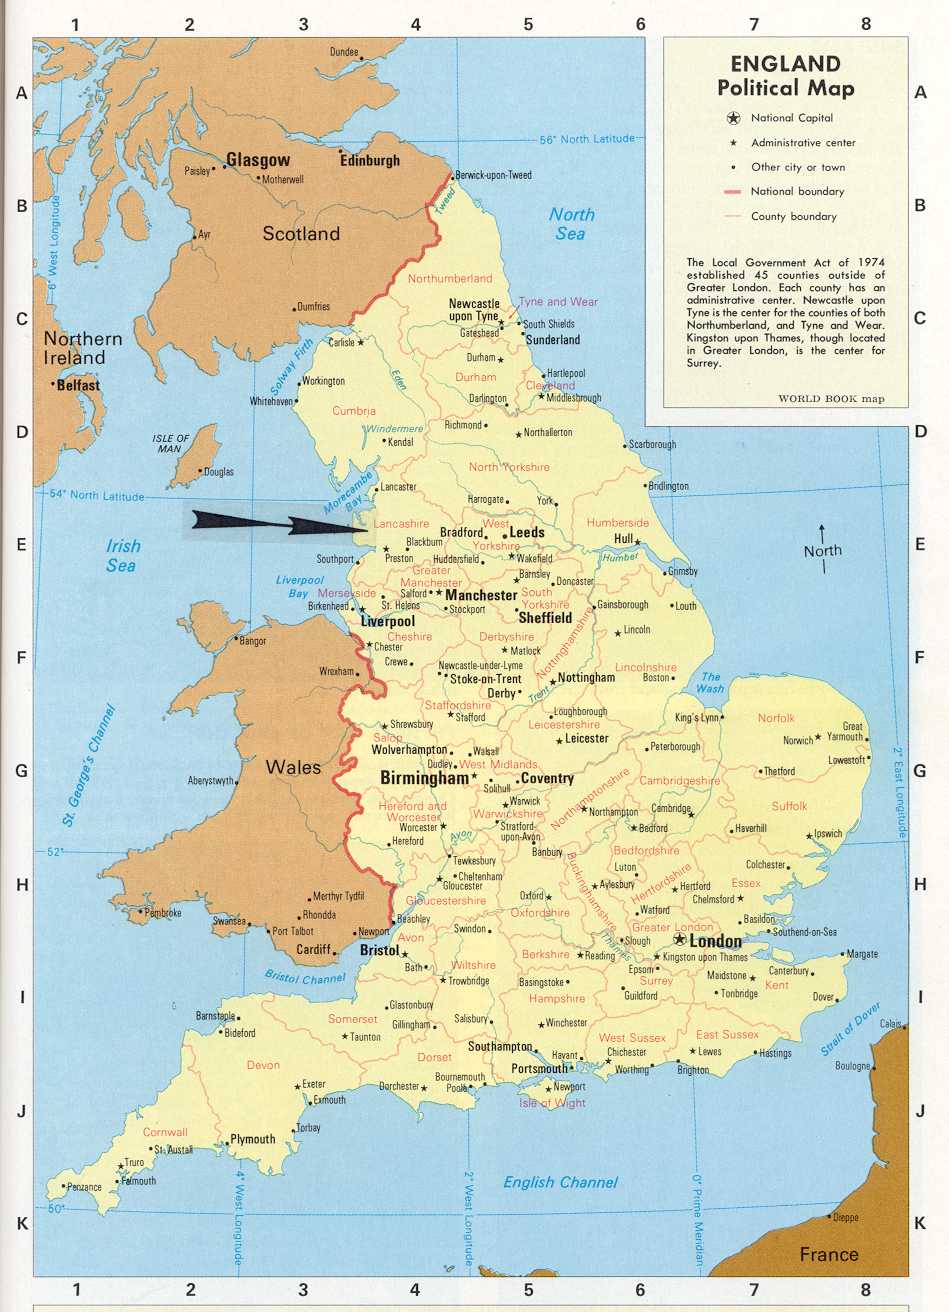 Where is Lancashire County Located in England